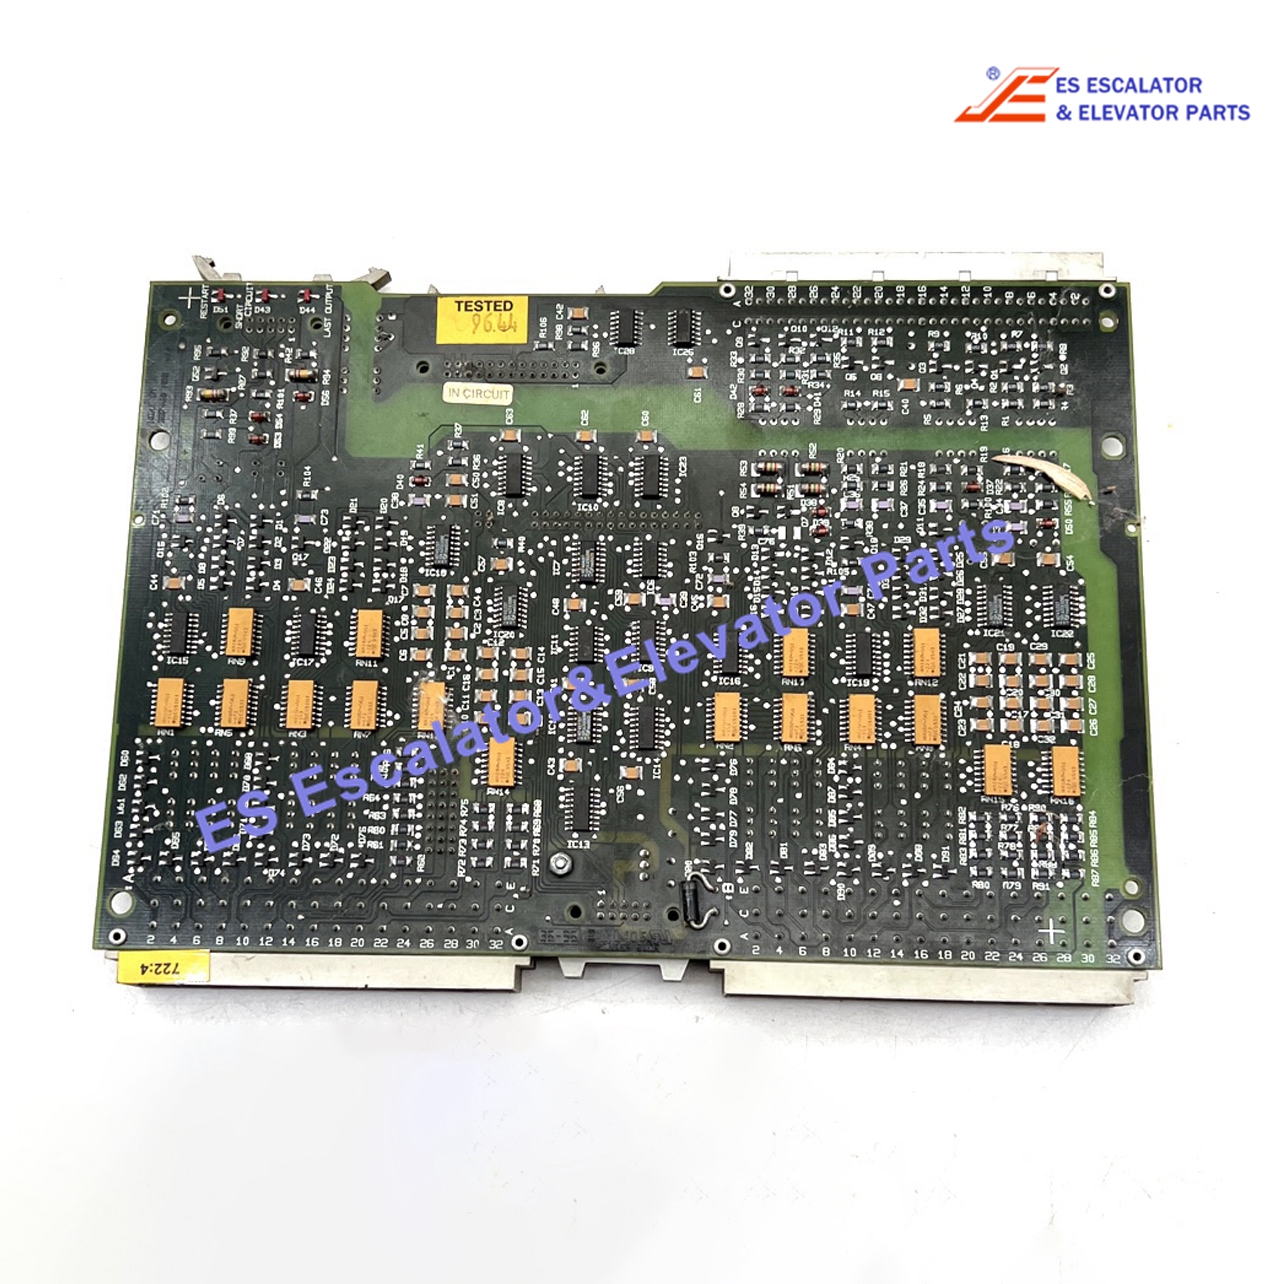 KM397452G01 Elevator PCB TMS200/600 EXP3 Use For Kone